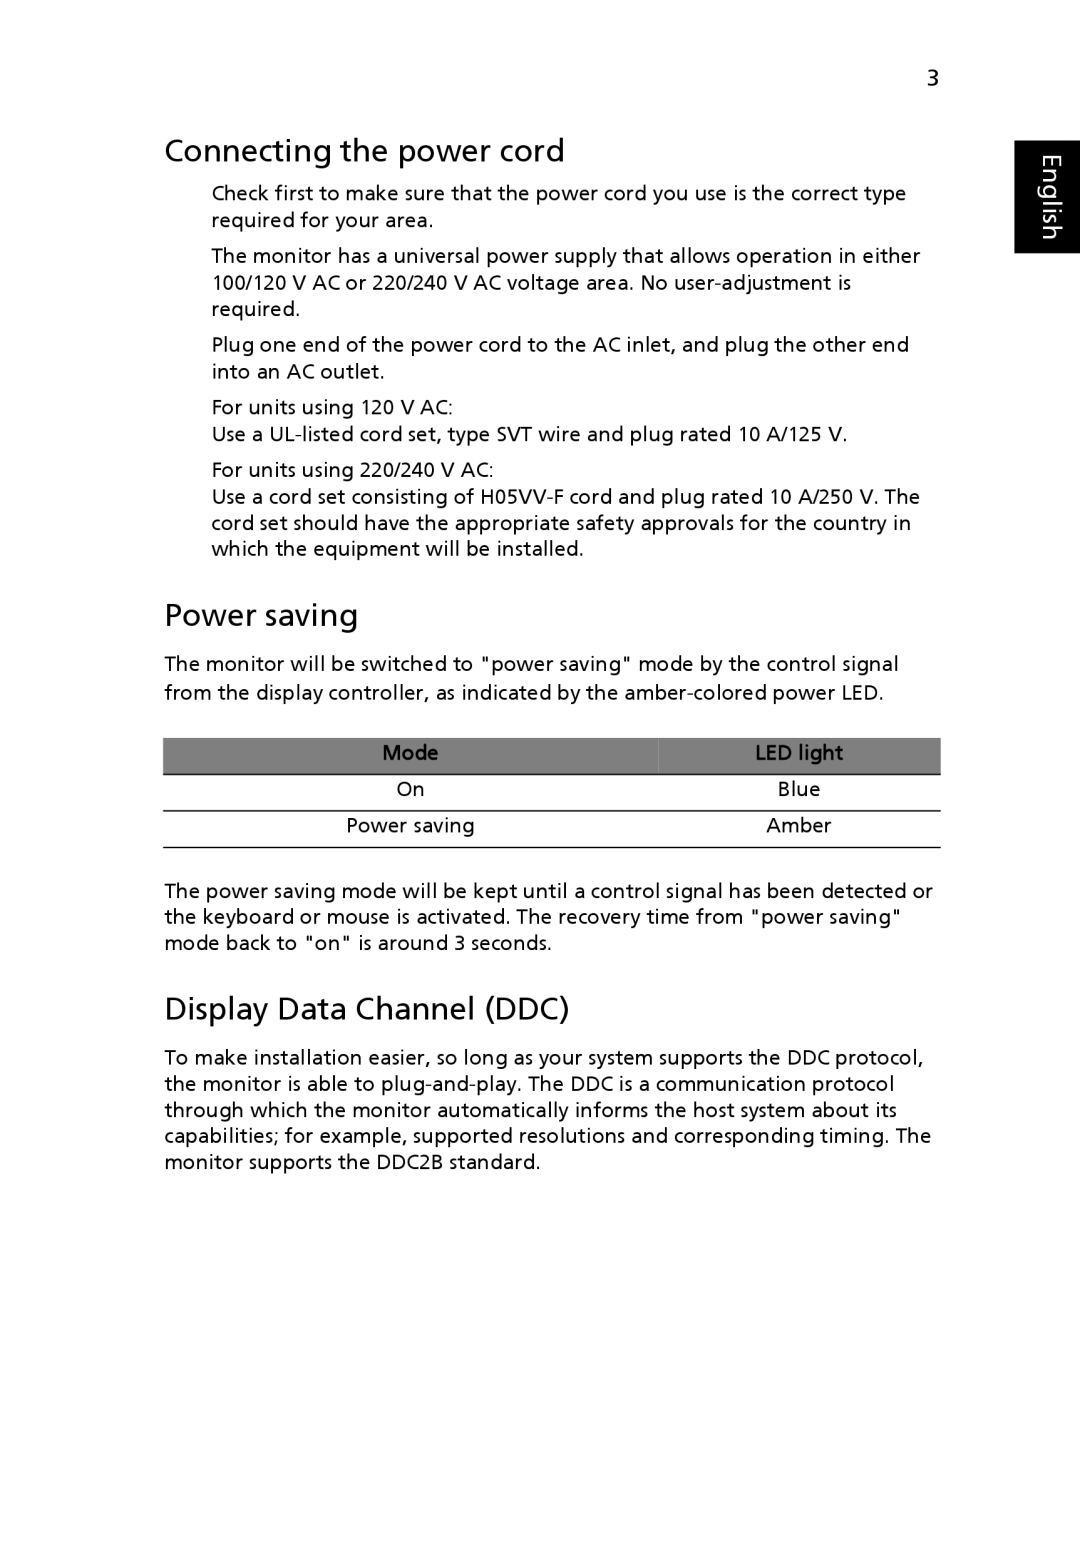 Acer V173 manual Connecting the power cord, Power saving, Display Data Channel DDC, Mode LED light 